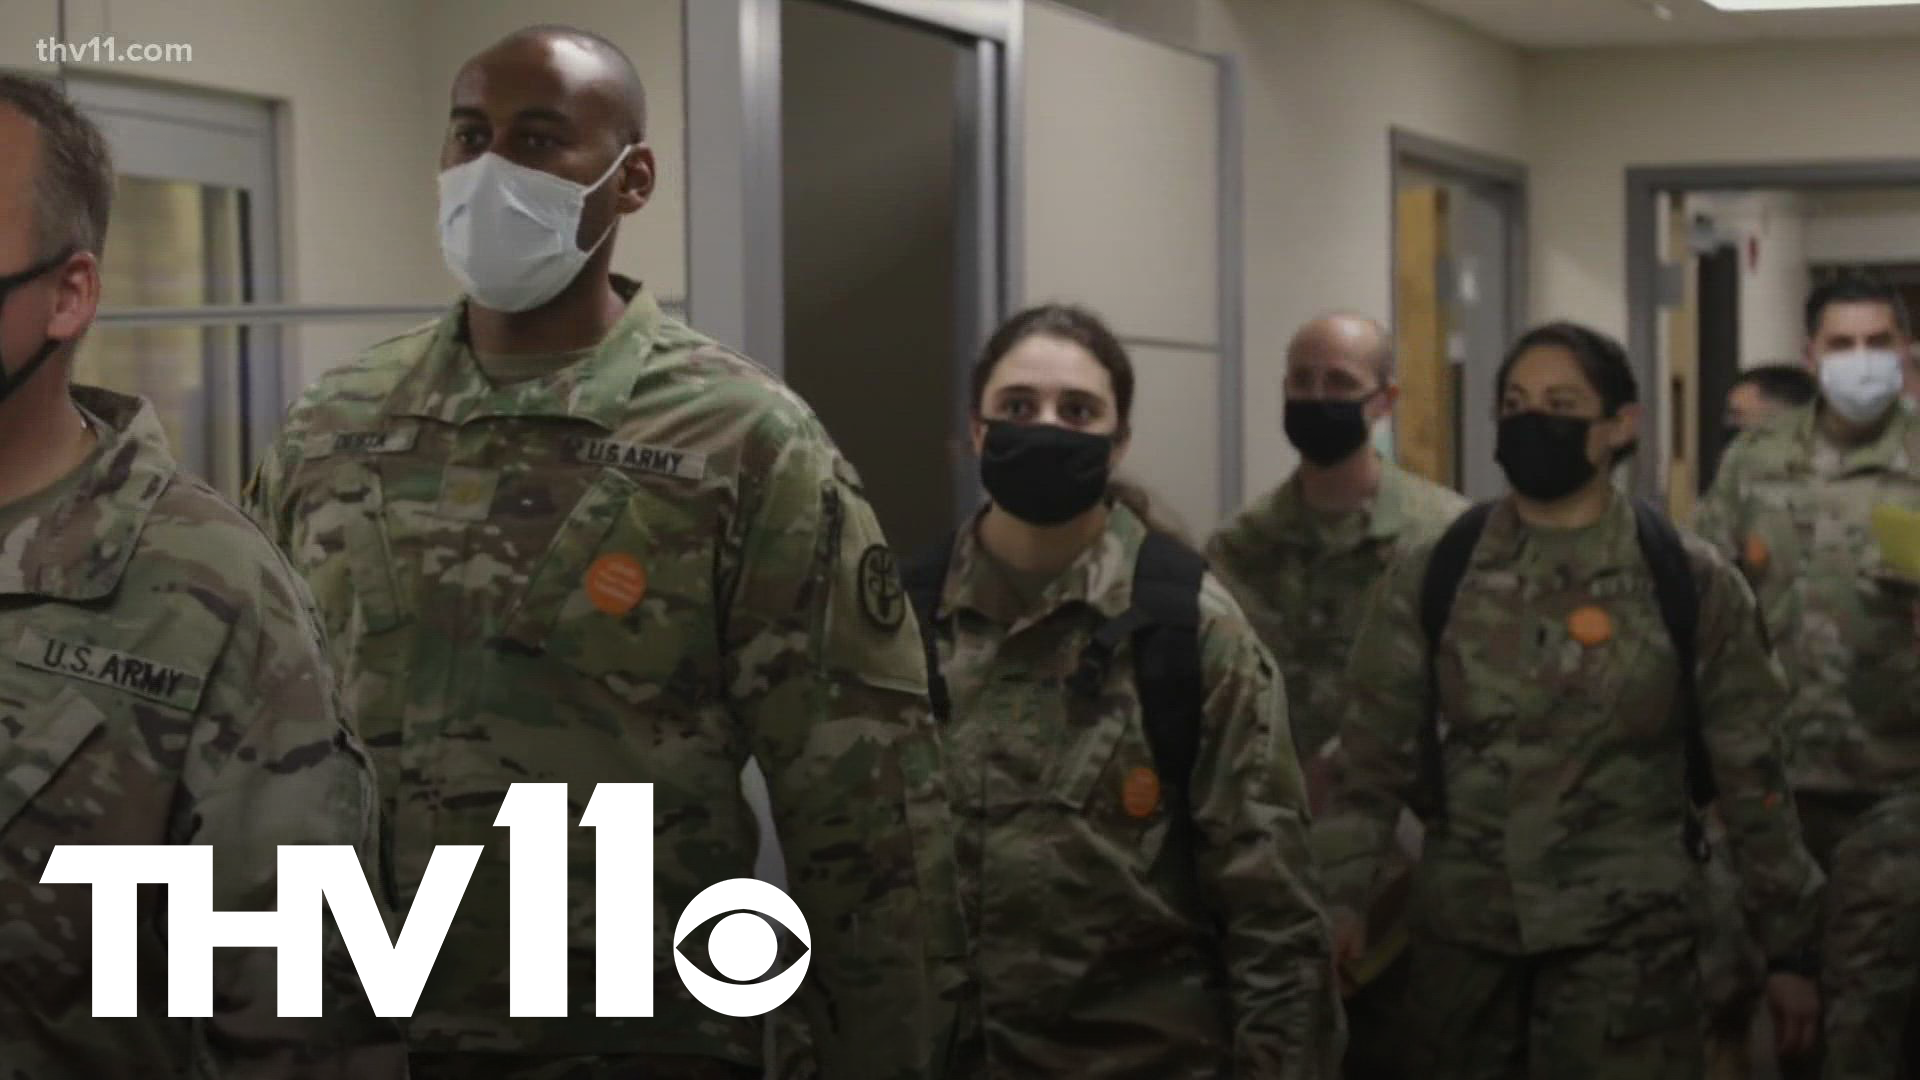 Over the next month, the Army Medical Unit will be helping the already fatigued hospital staff handle the increased capacity at UAMS.